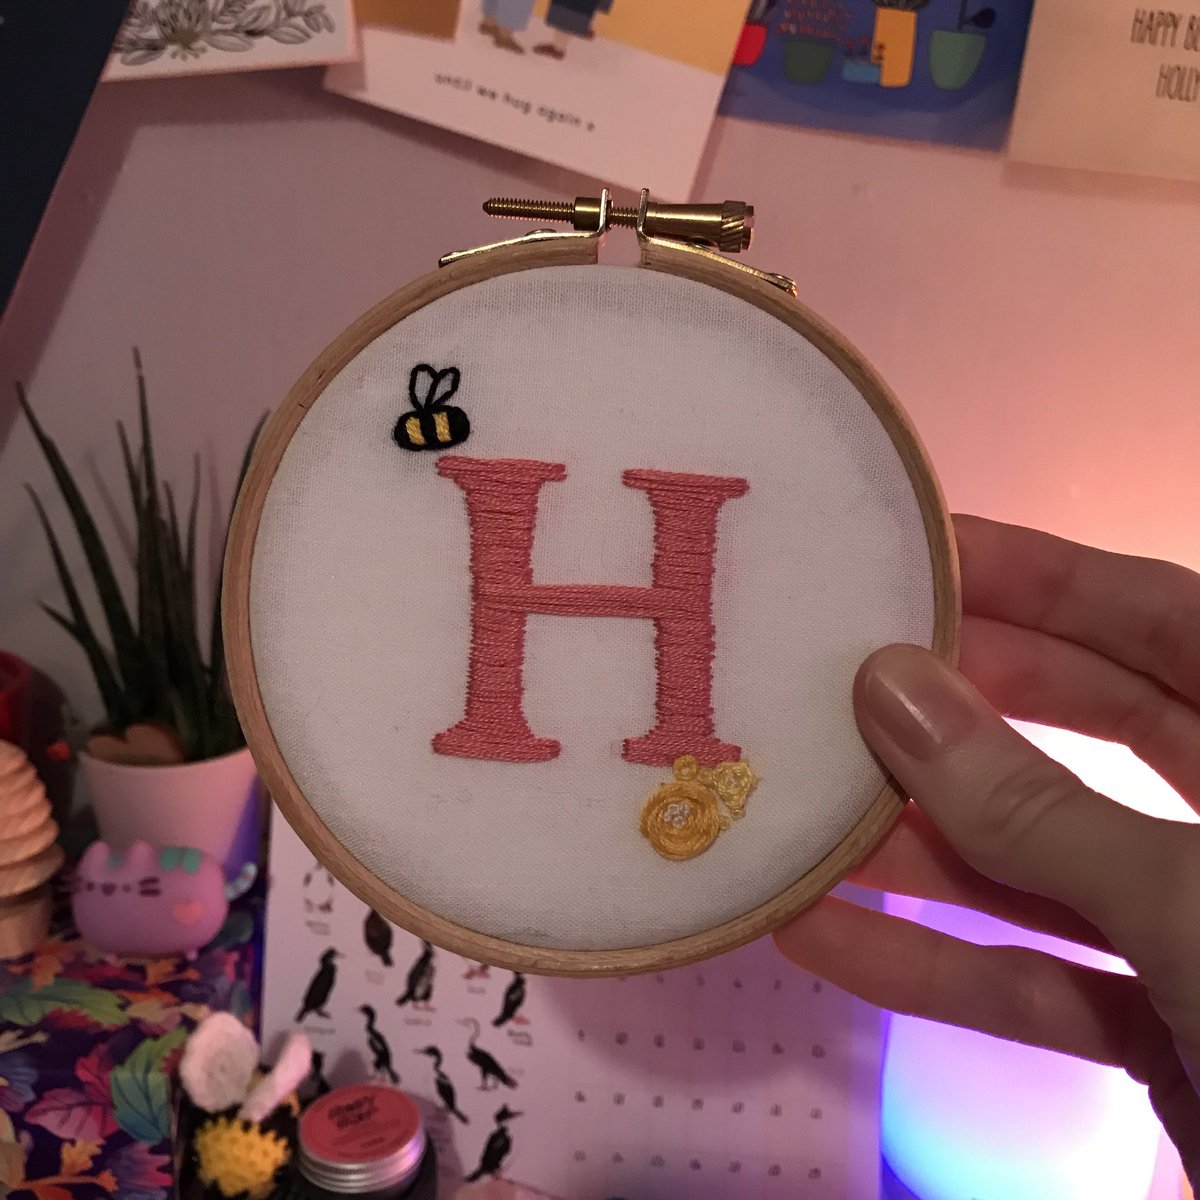 Another wonderful embroidery artist is the lovely  @rebeccaxpage of Stitch Ambition! I was kindly gifted this hoop by  @megscarbieart and she lives on my bookcase now. Rebecca is such a kind soul and ridiculously talented! Her shop is here: http://Etsy.com/uk/shop/stitchambition